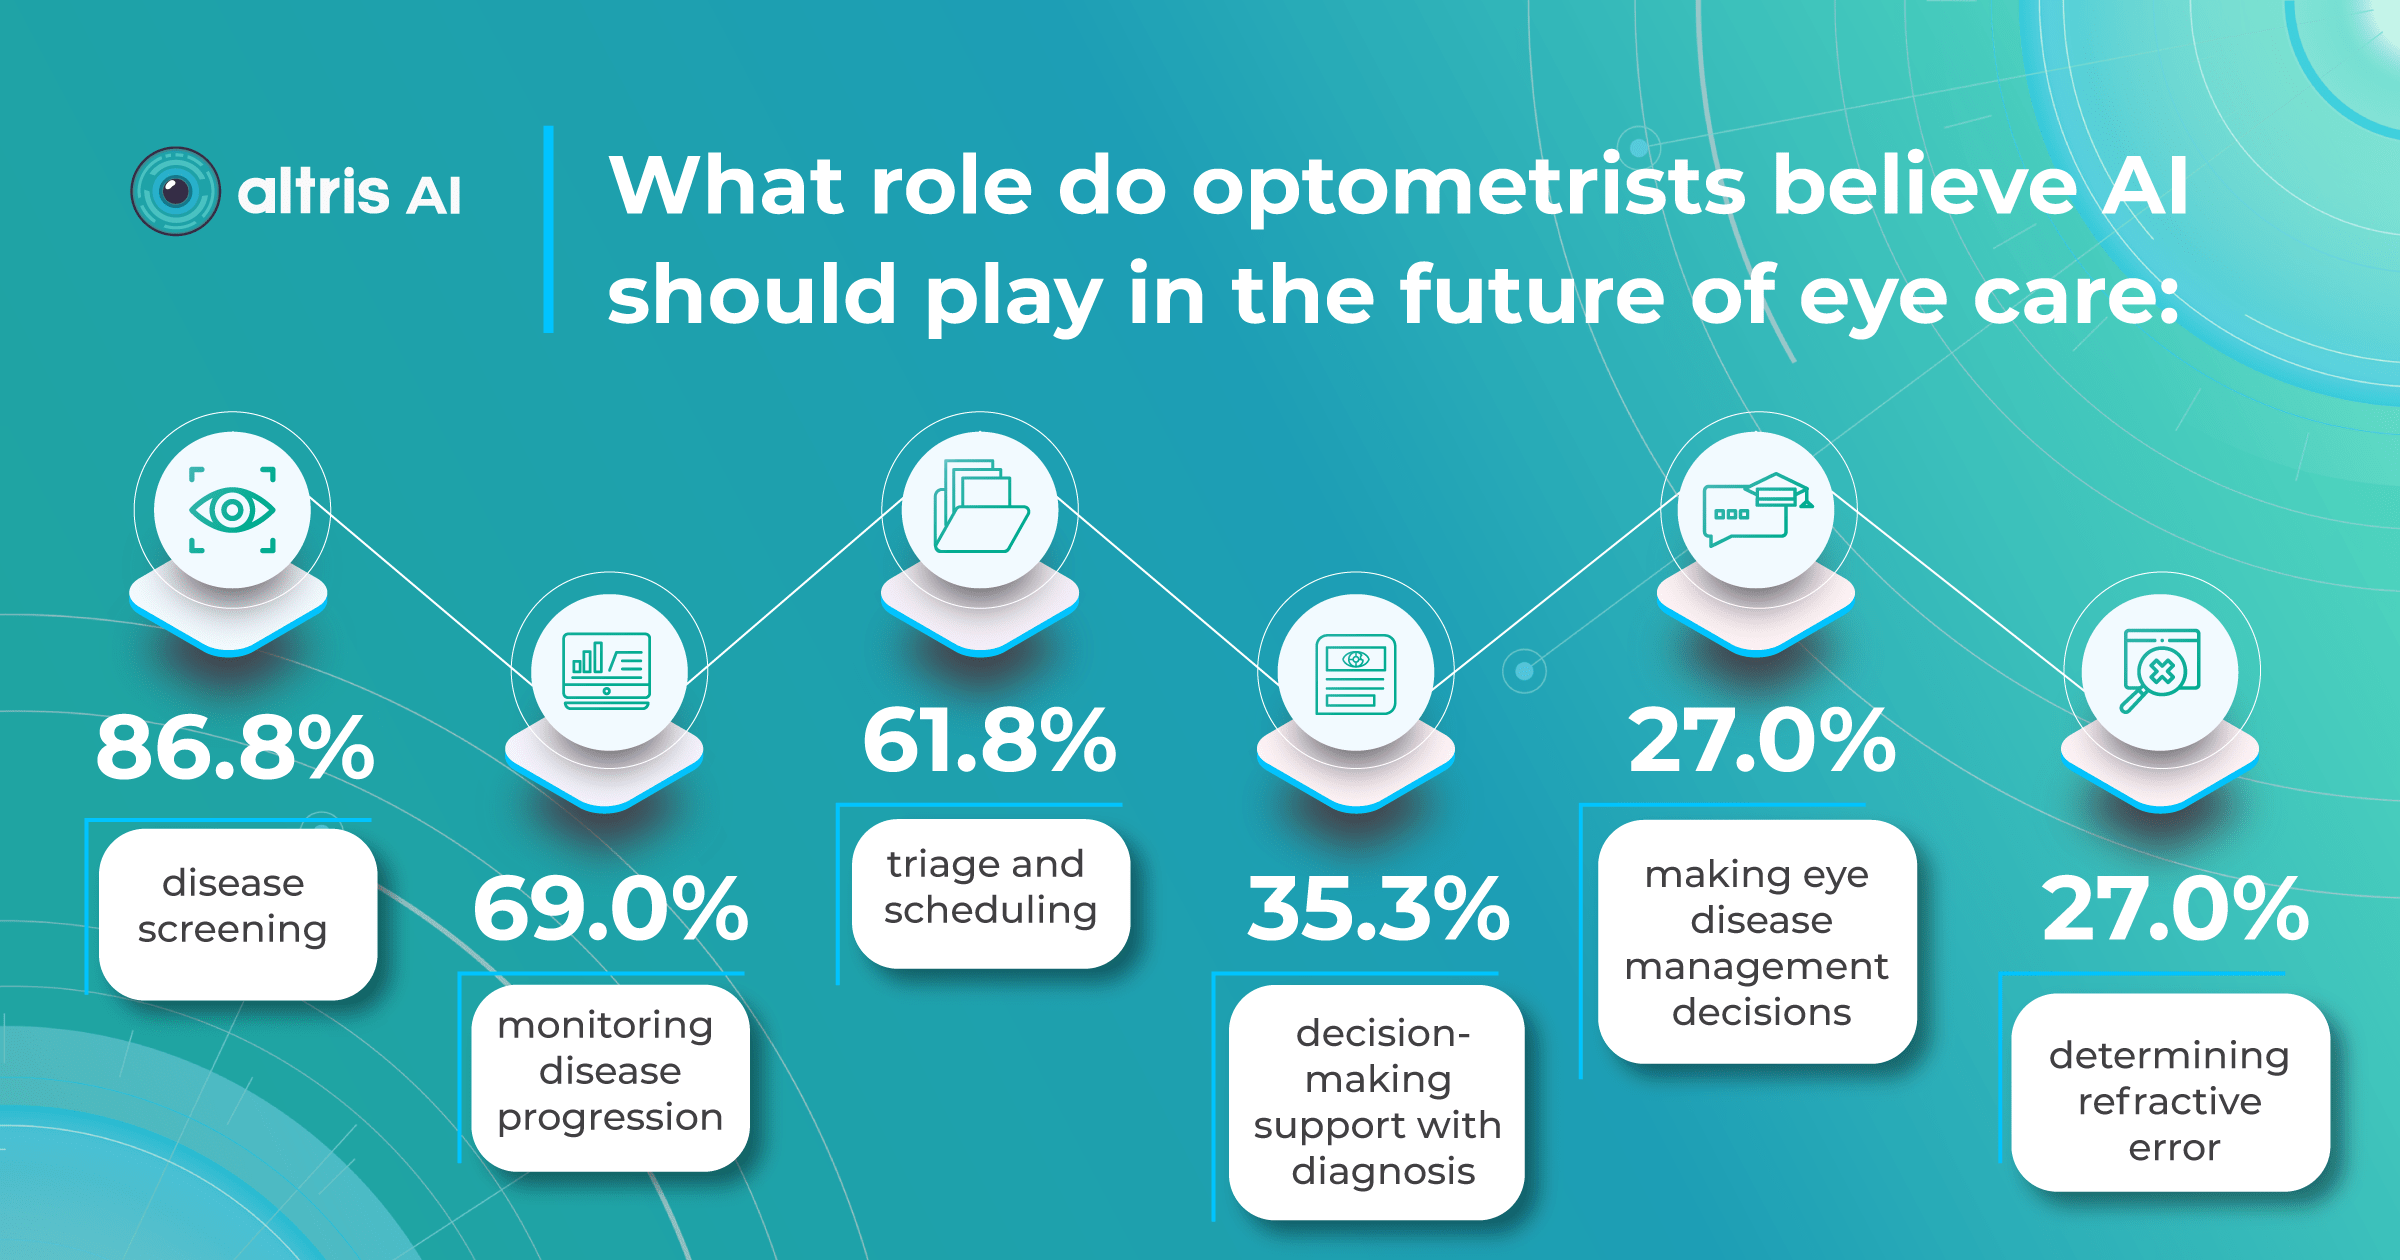 Optometrists Survey Infographic on AI implementation in eye care practice